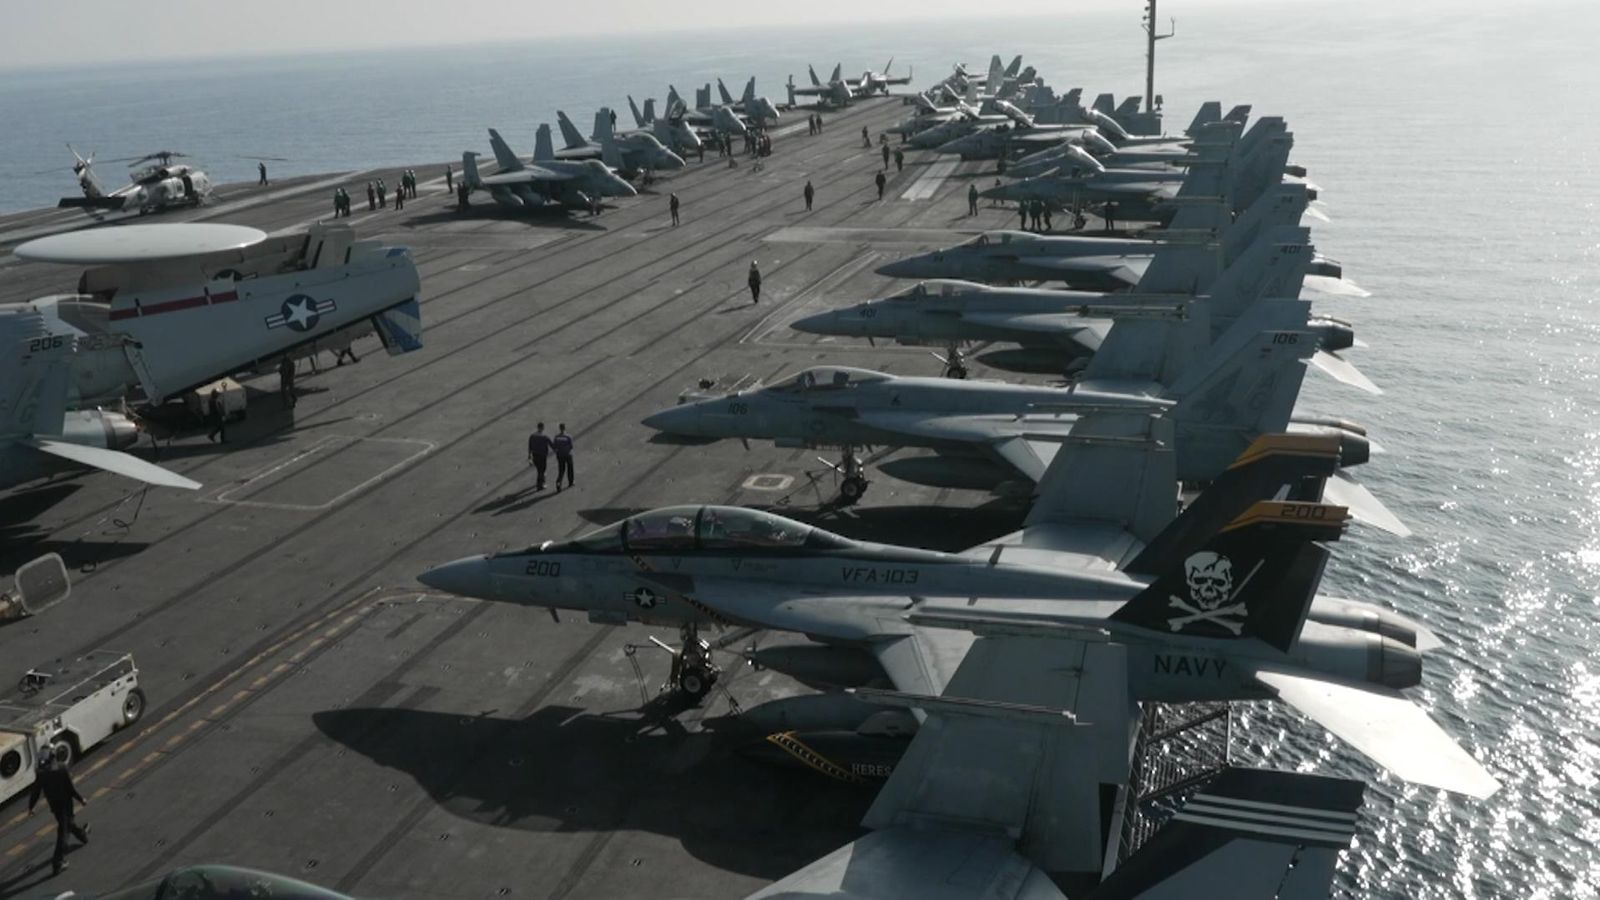 'Ready for anything': US aircraft carrier crew training for war with Russia but aims to deter threats